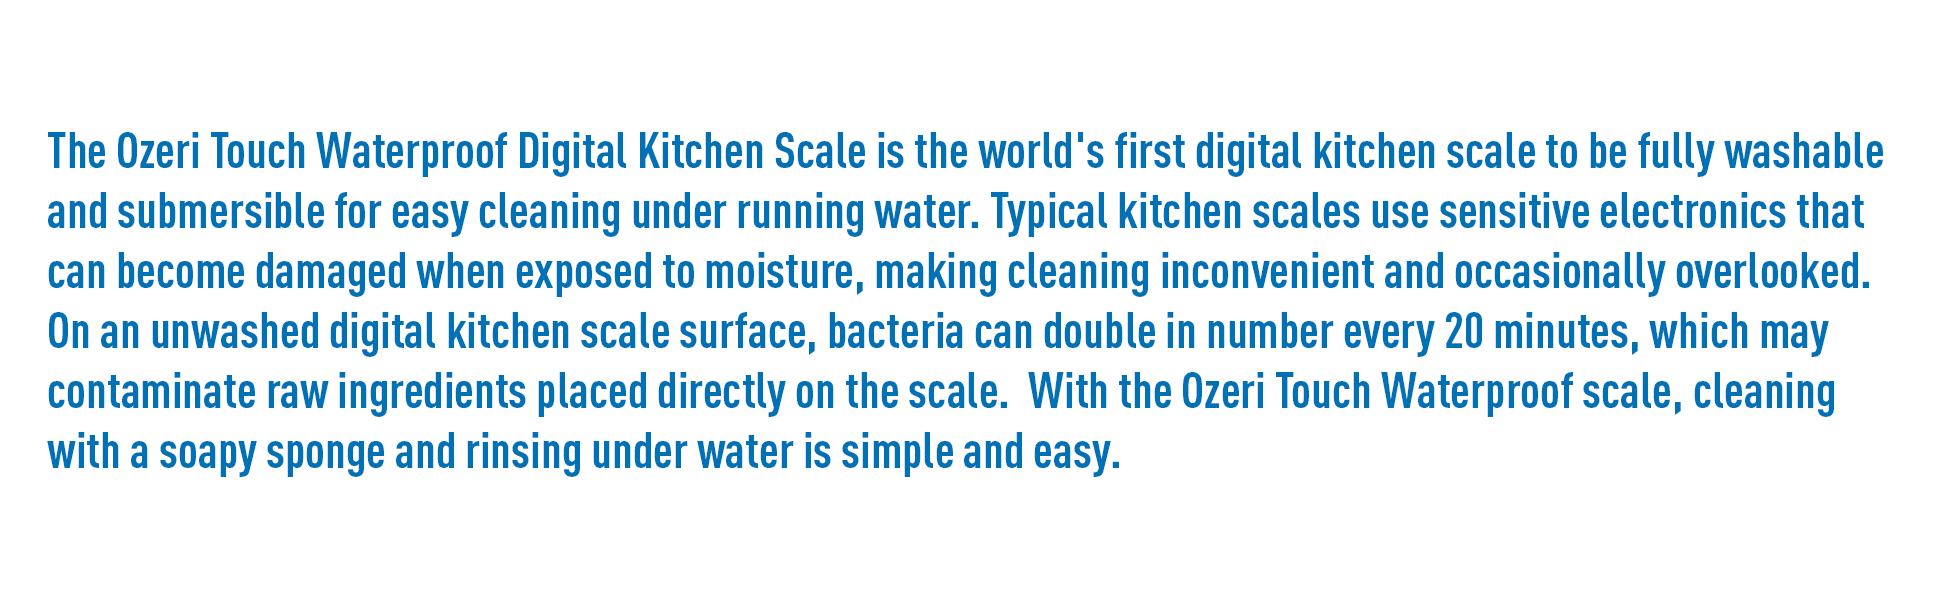 https://ozeri.com/public/frontend/img/kitchen-scales/B07BR8Y9T4/03-Wide-Middle.jpg